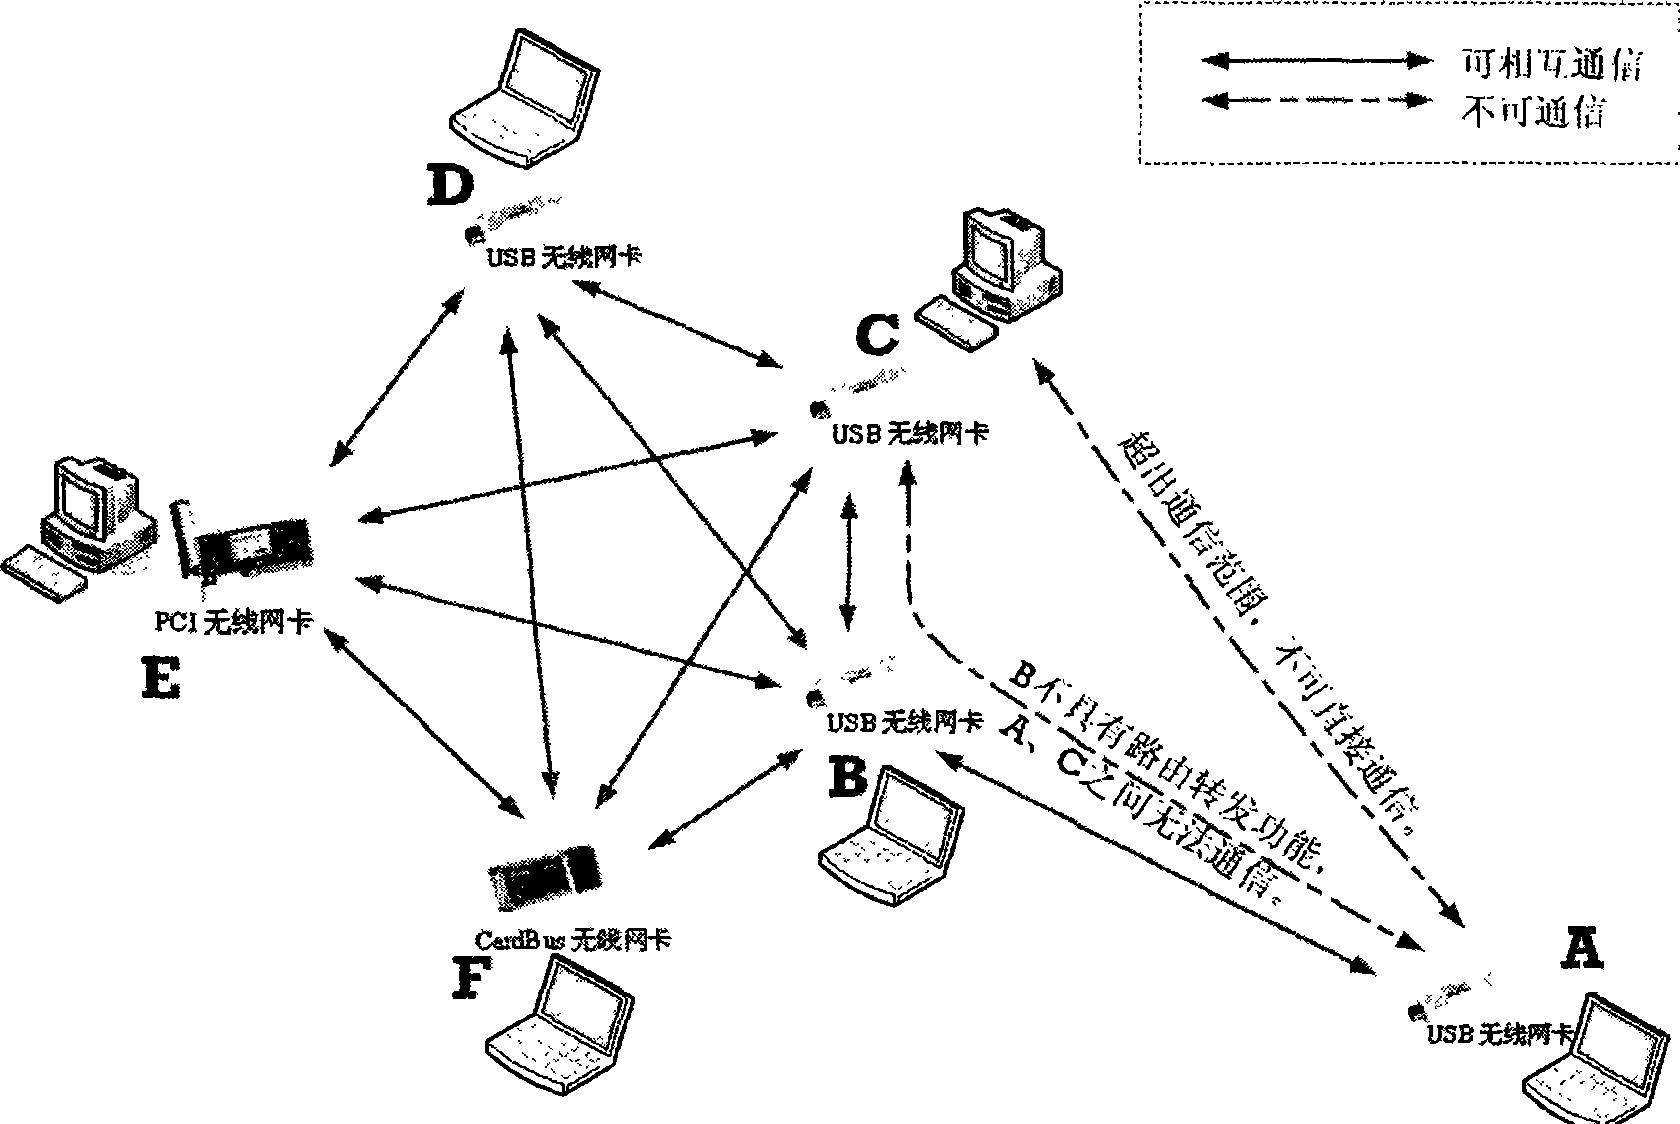 Forwarding method used for constructing multi-hop routing in wireless self-organizing network